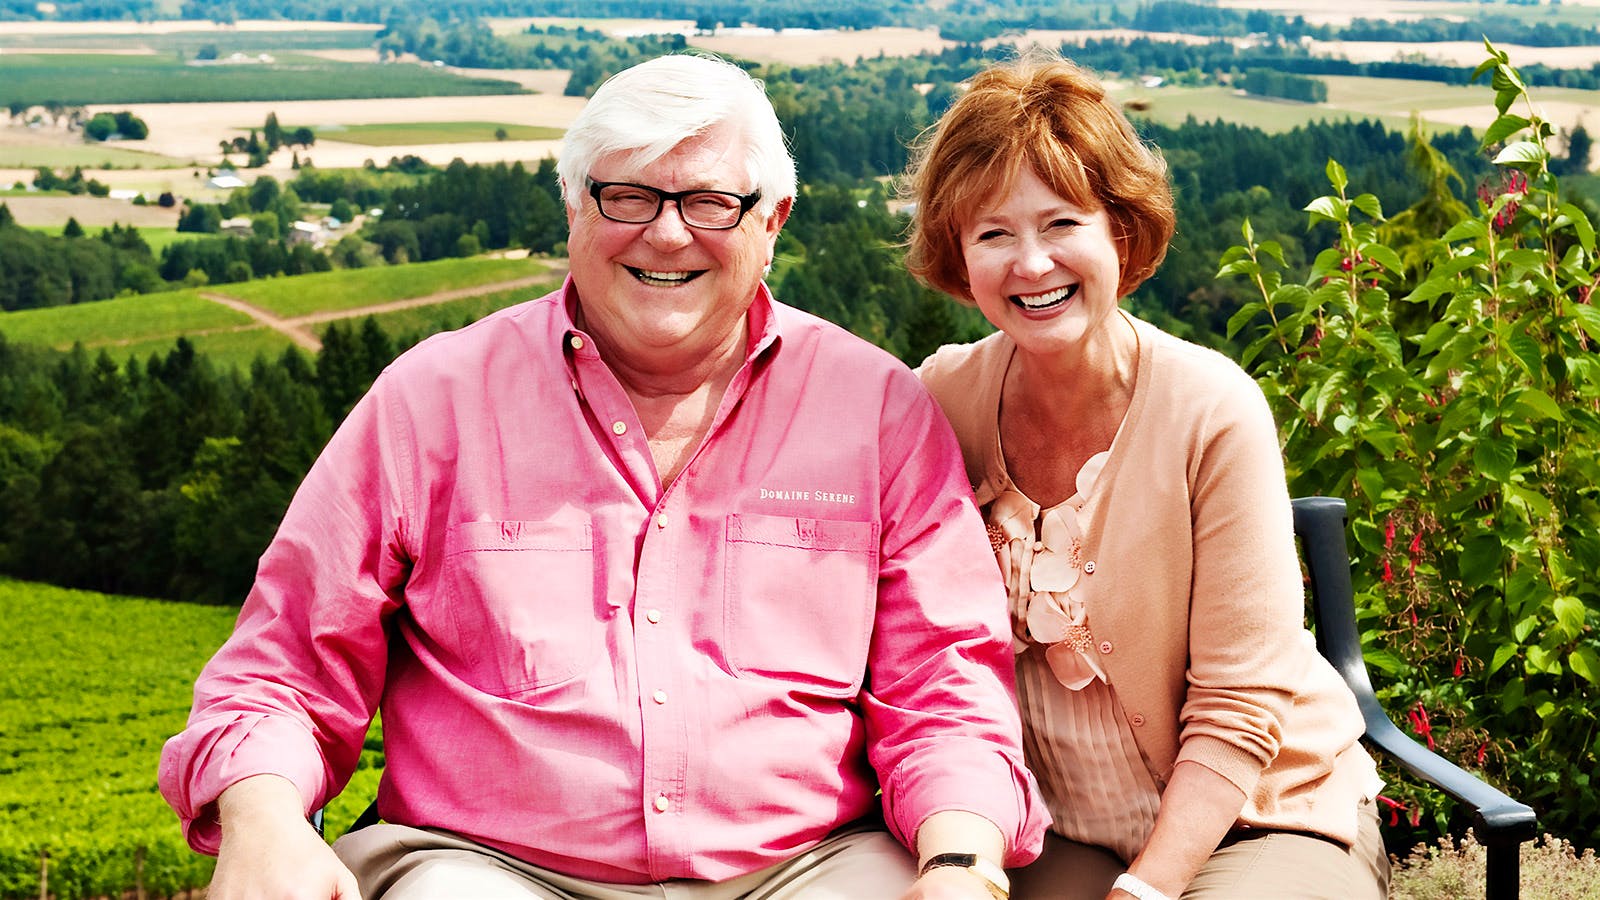 Ken Evenstad, Co-Founder of Oregon's Domaine Serene Winery, Dies at 77